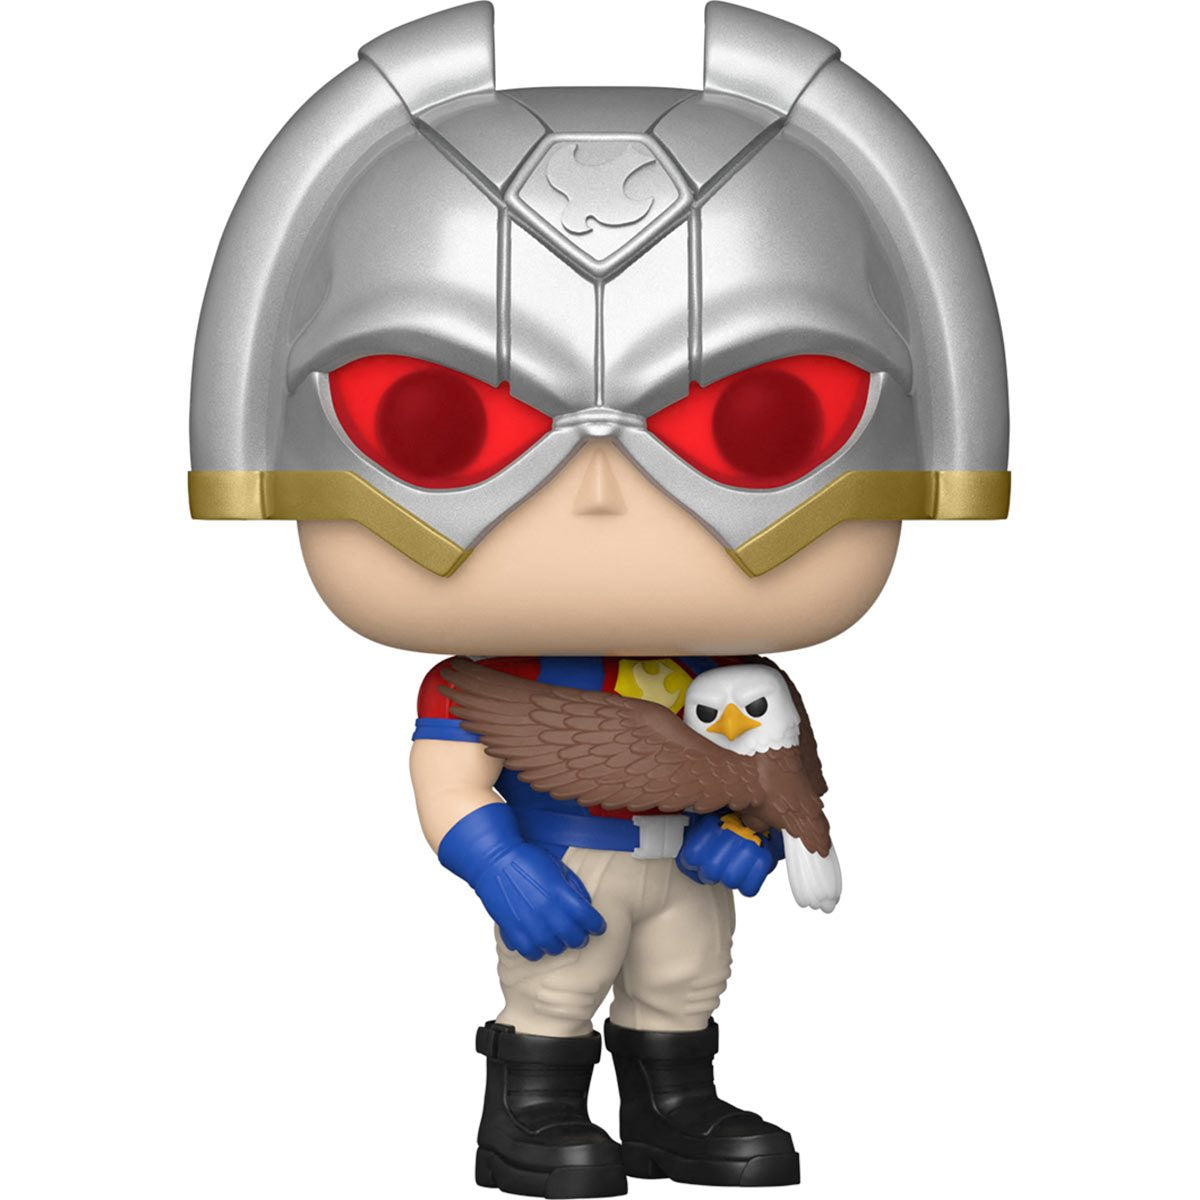 Funko Pop! Peacemaker: Peacemaker with Eagly